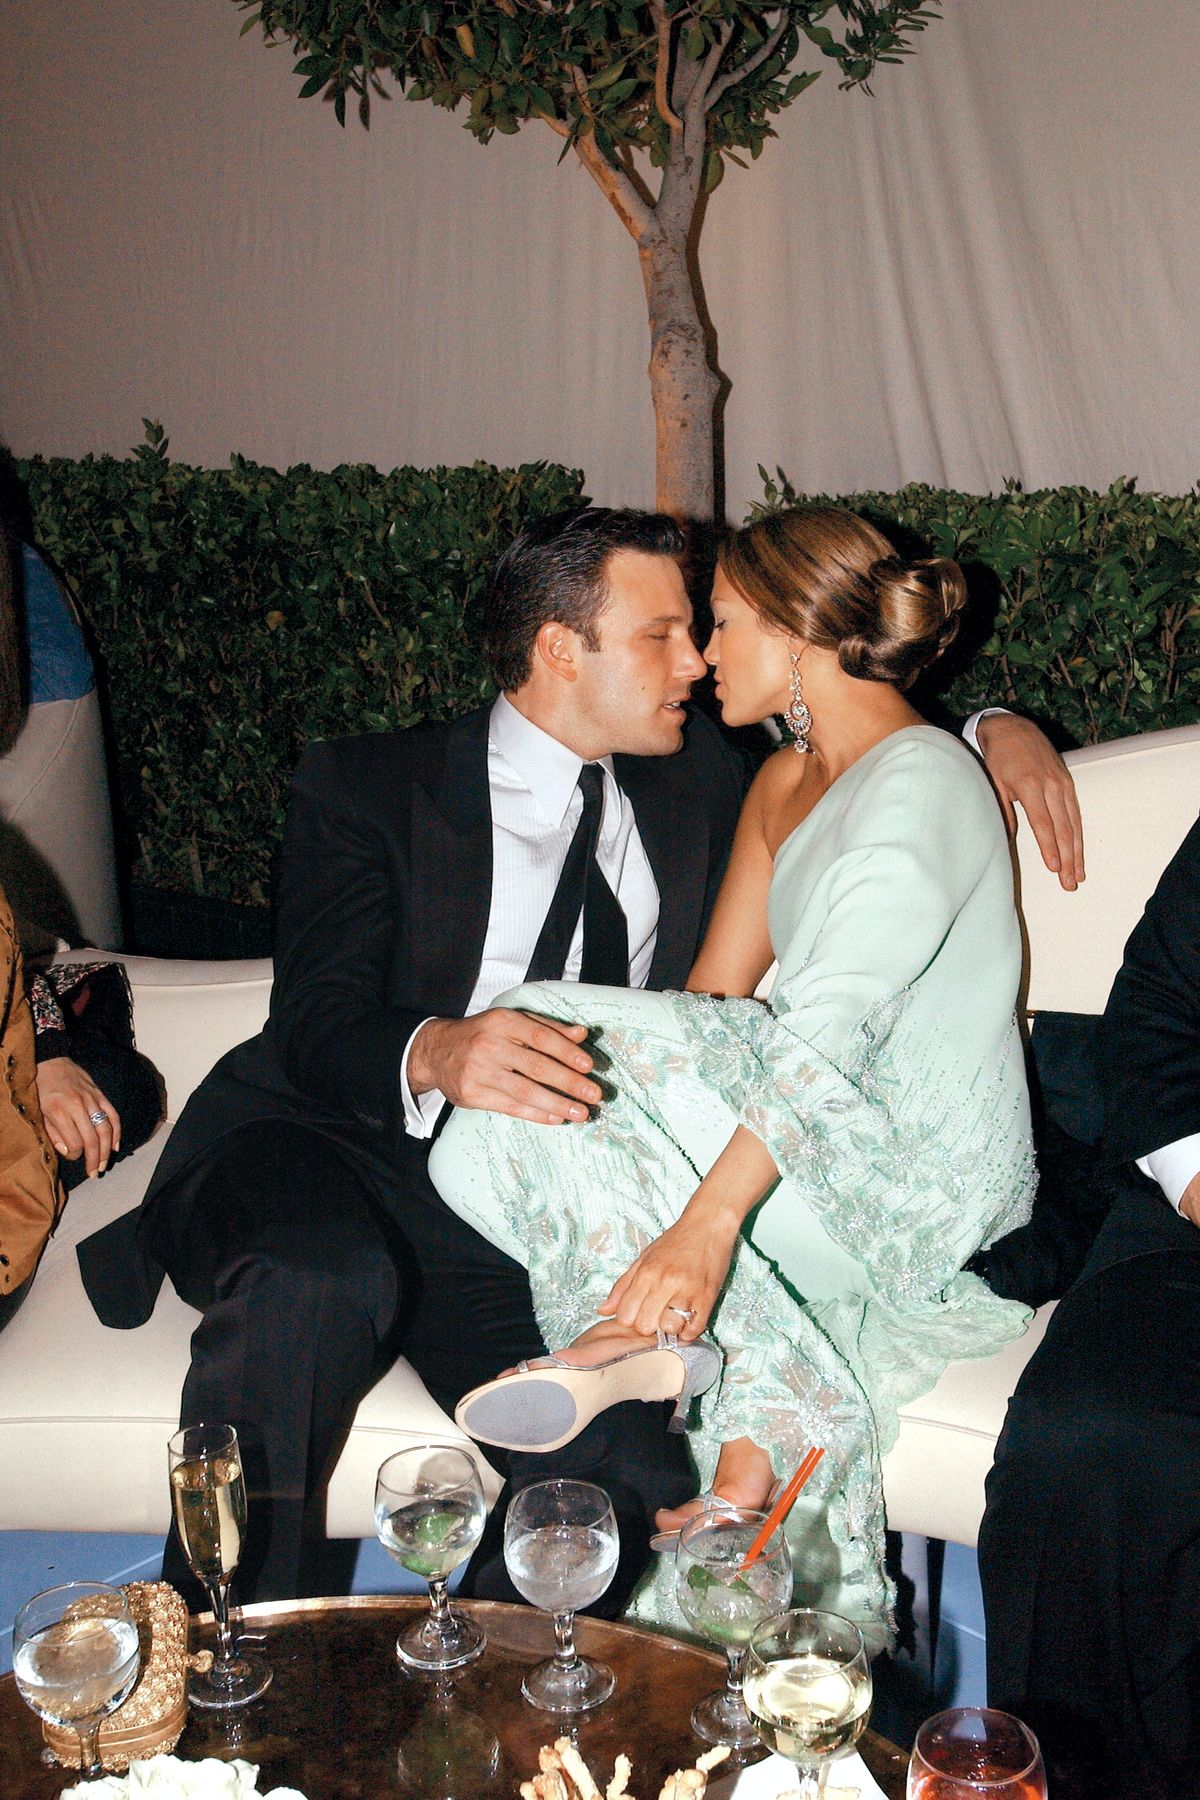 Ben Affleck Can’t Stop Gushing About J.Lo takmer 20 rokov po ich rozchode